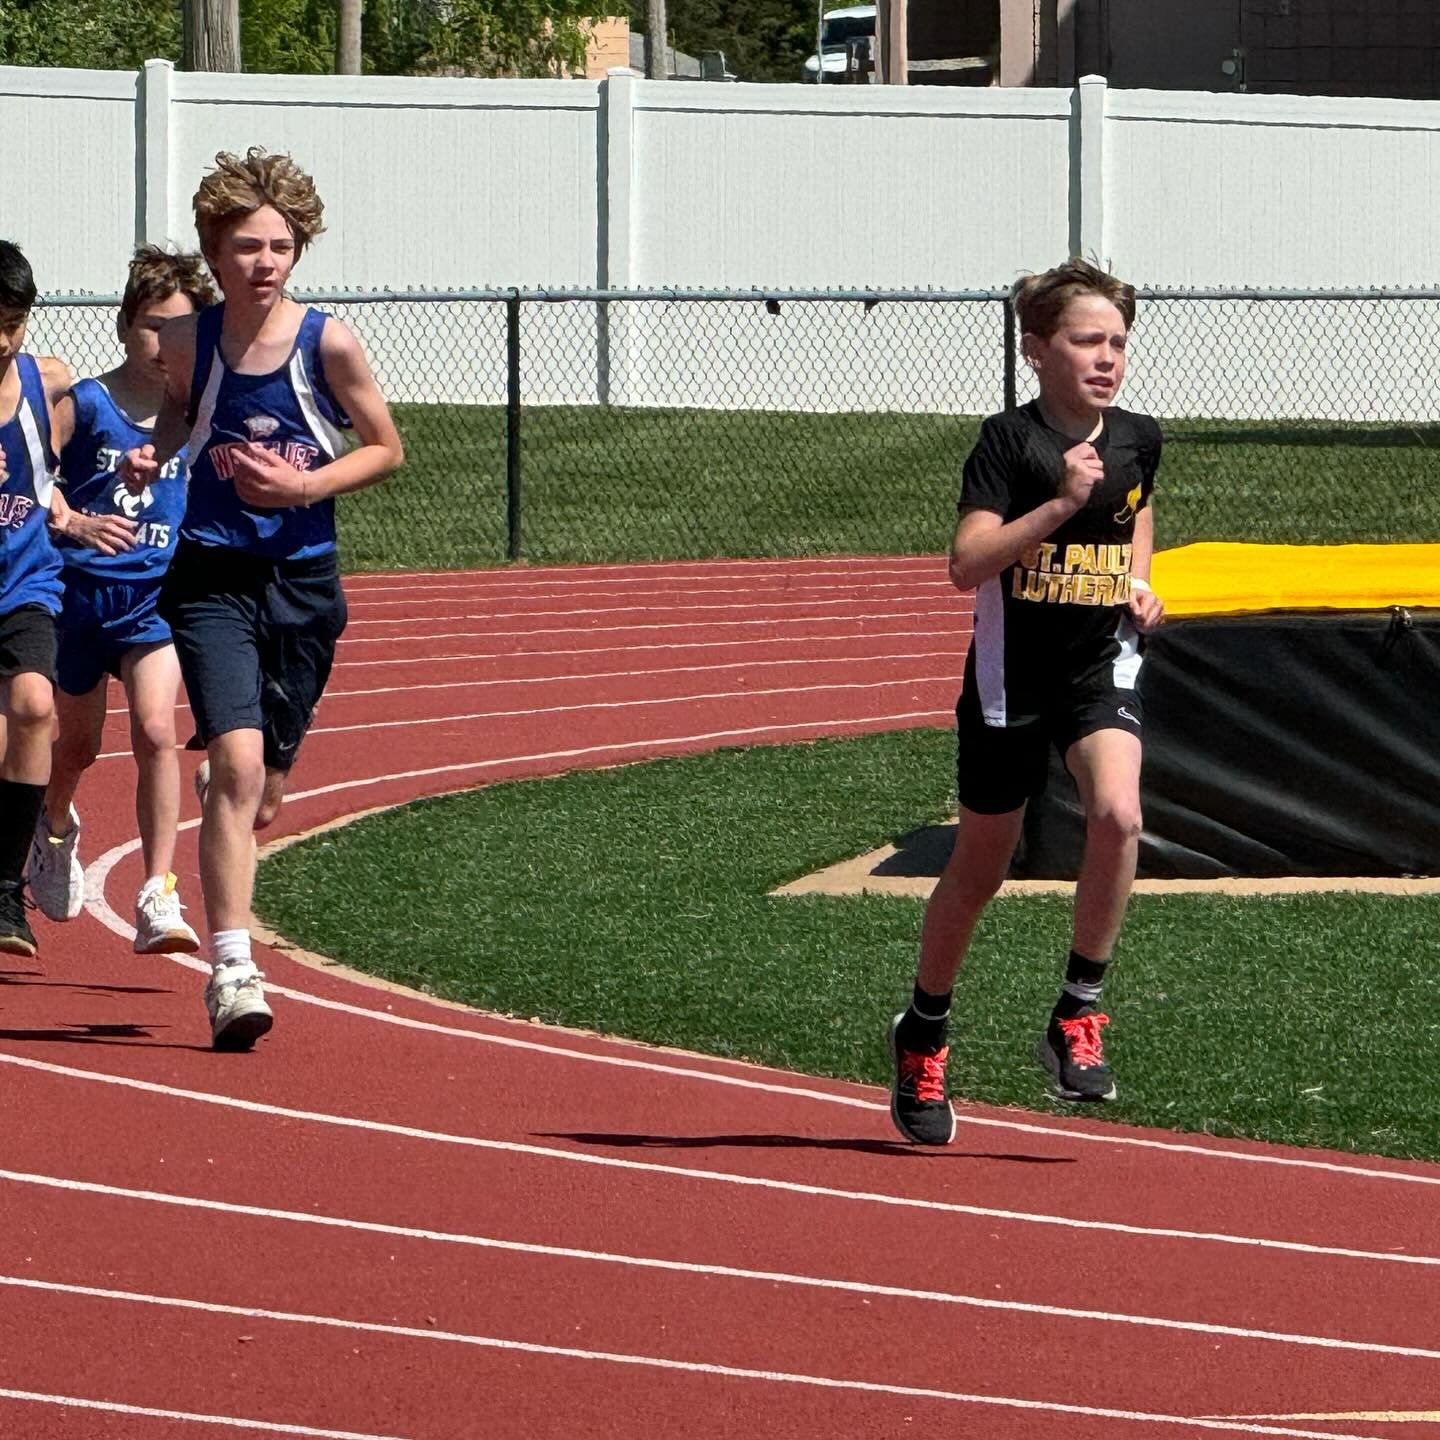 Our SPLS Saints track and field athletes were back in action again today at the Chargers Invitational at Lutheran South! Many of them earned new personal records too! Way to go, Saints! 
A special congratulations to our 1st place finishers: Earl in t